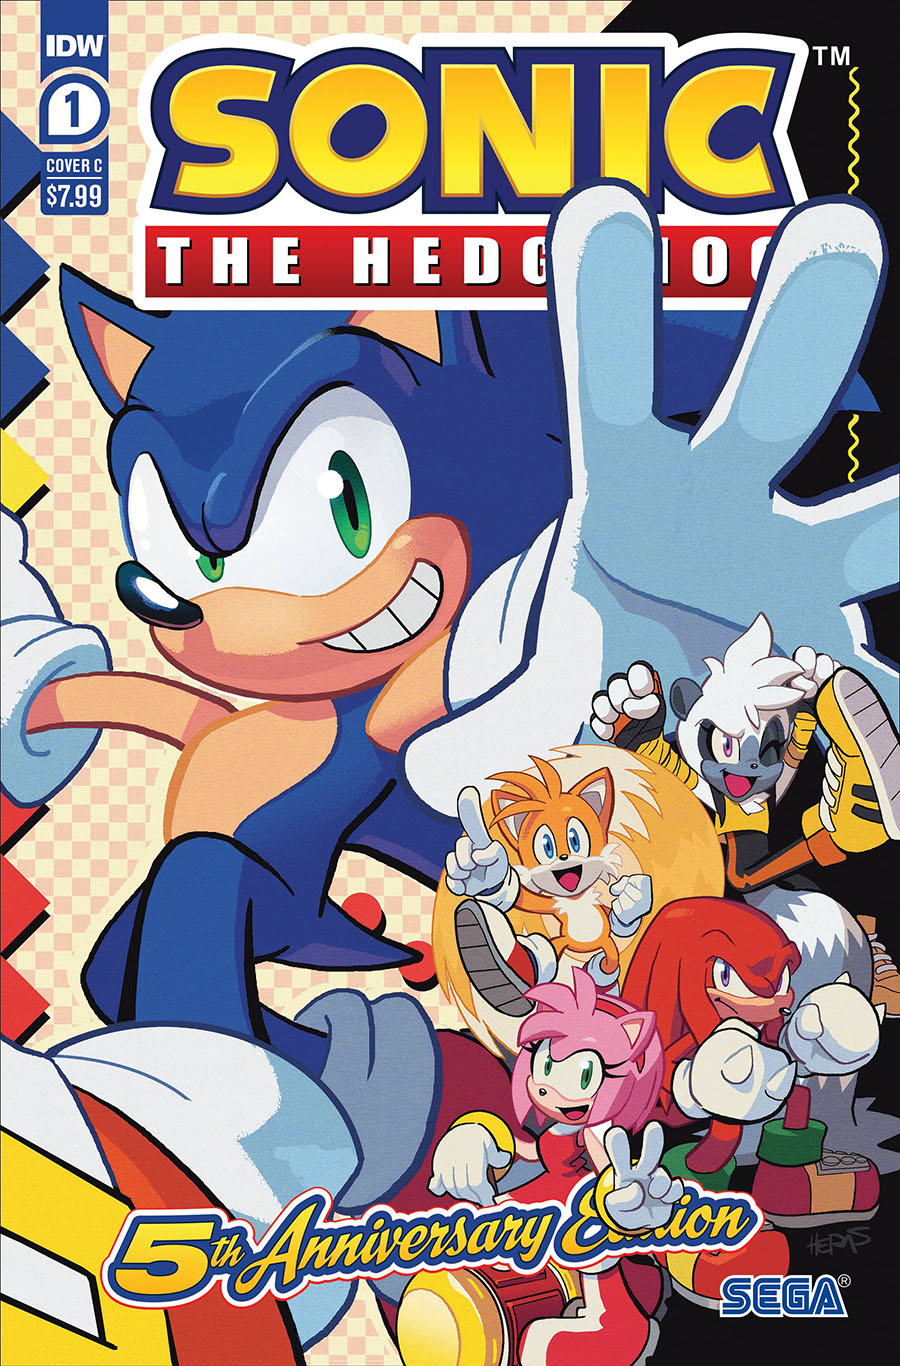 Sonic The Hedgehog Vol 3 #1 5th Anniversary Edition Cover C Variant Matt Herms Cover